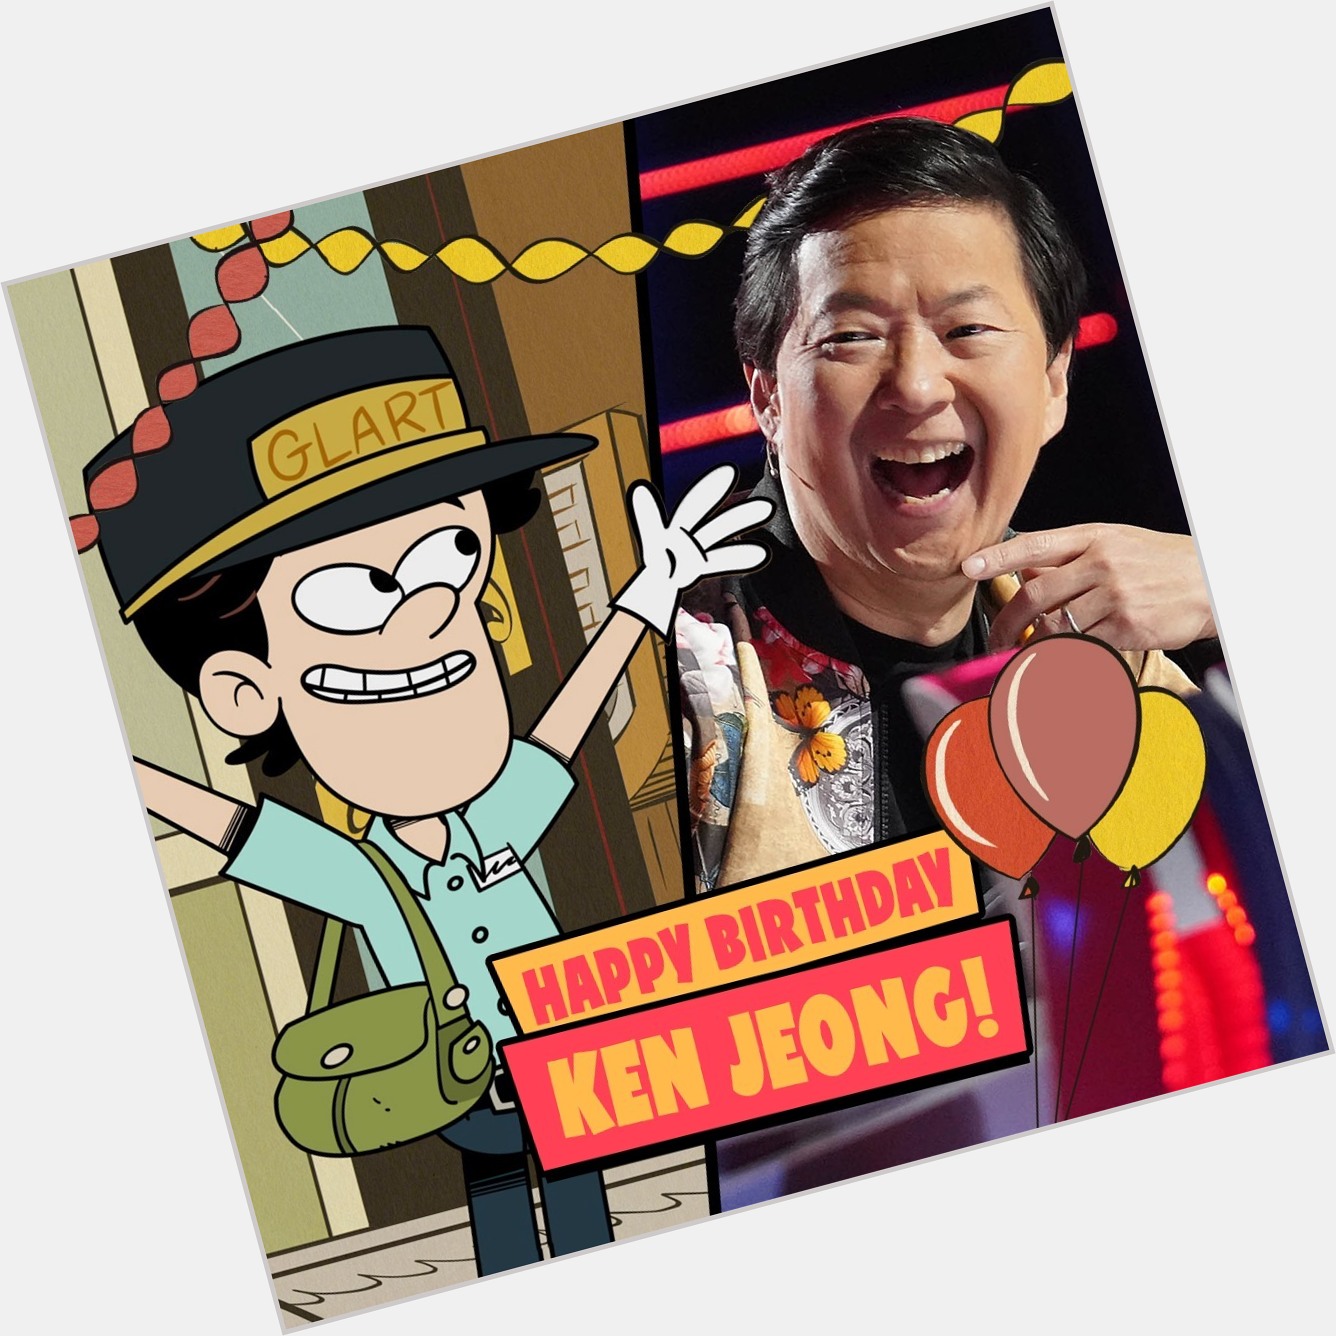 From  account: \"Wishing a happy bday to the voice of Mr. Chang, Ken Jeong \" 